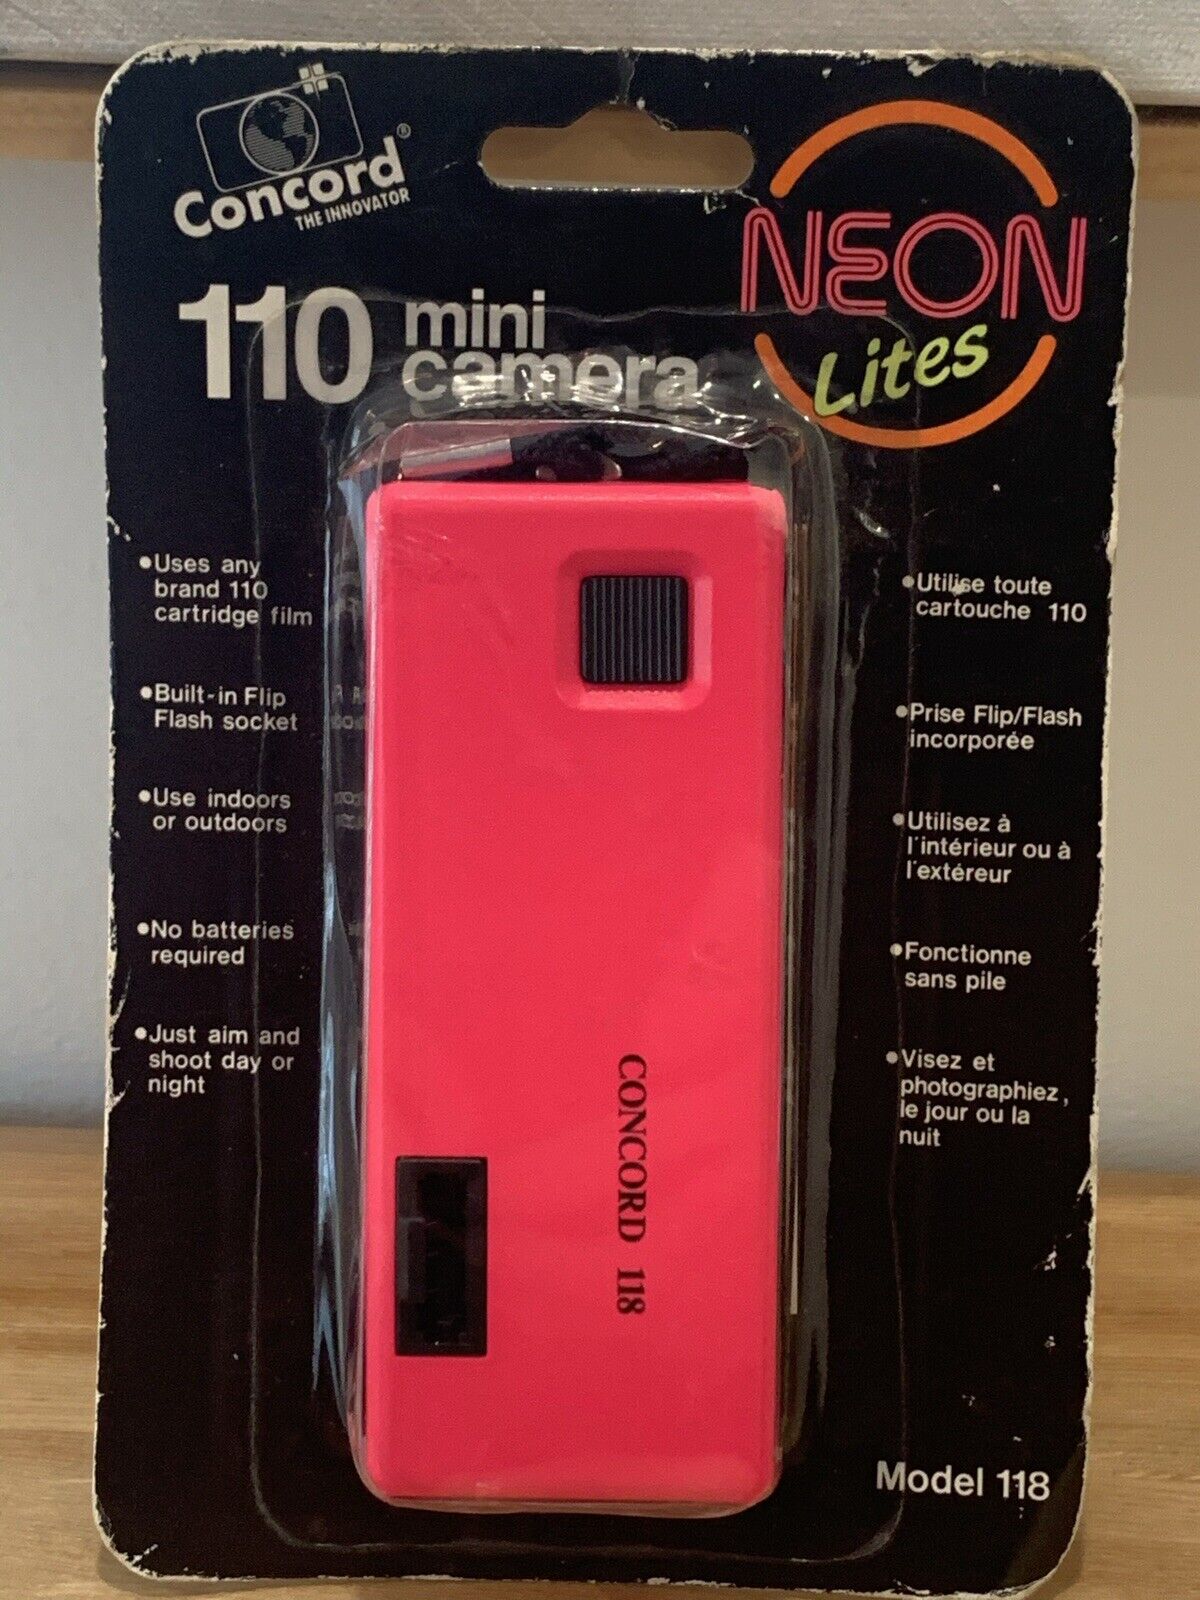 Concord Neon Omaha Mall Selling and selling Lites Camera Hot Pink Mini 118 Film Model 110